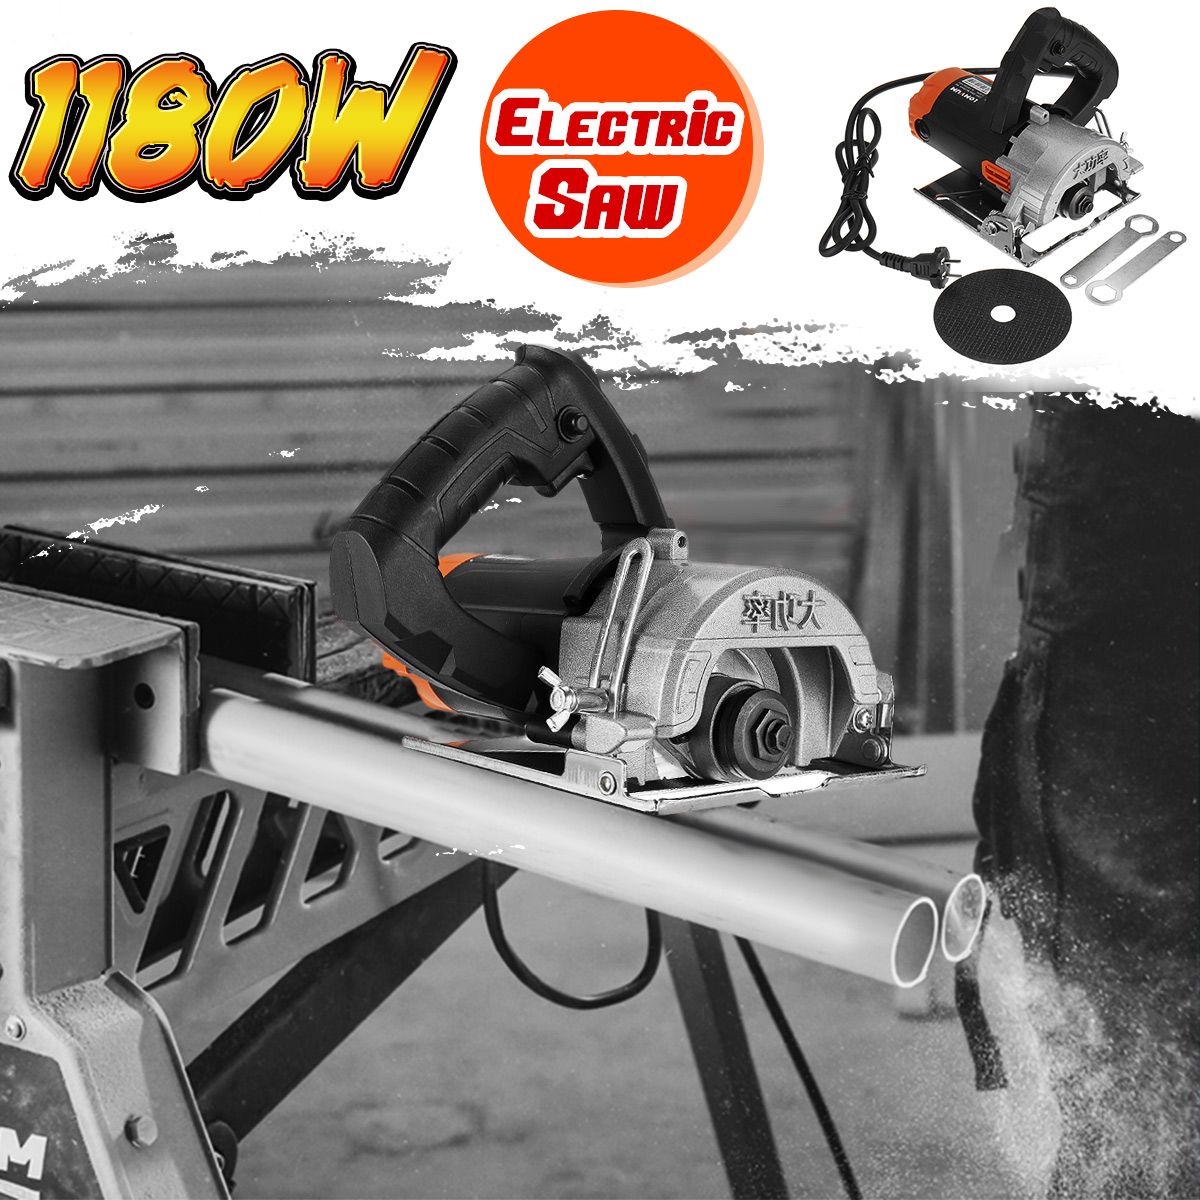 1180W-Professional-Electric-Saws-Cutter-Machine-Wrench-Electric-Saw-Tools-with-Pieces-Blades-1527636